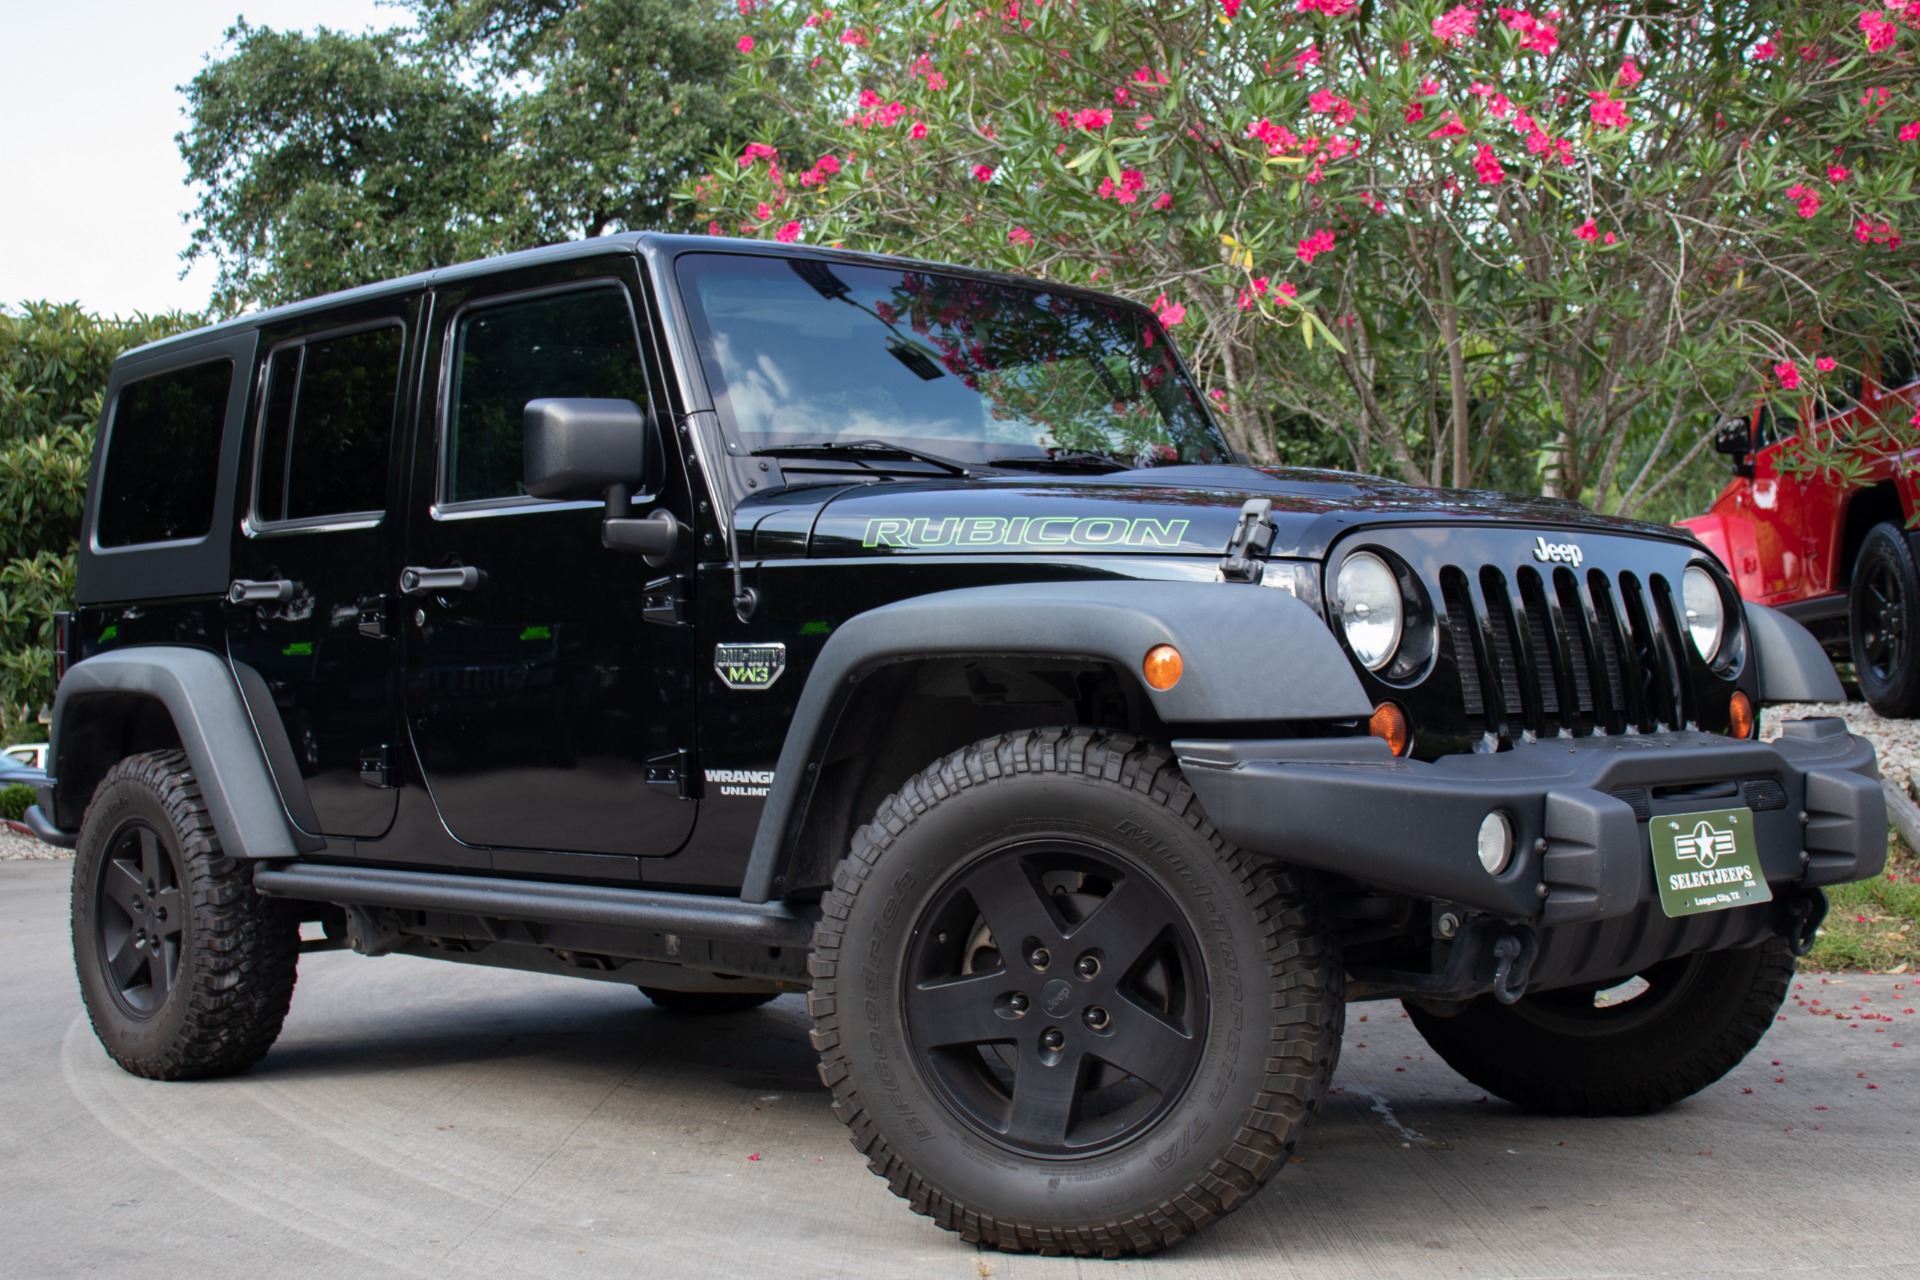 Used 2012 Jeep Wrangler Unlimited Call of Duty MW3 For Sale ($27,995) |  Select Jeeps Inc. Stock #205085